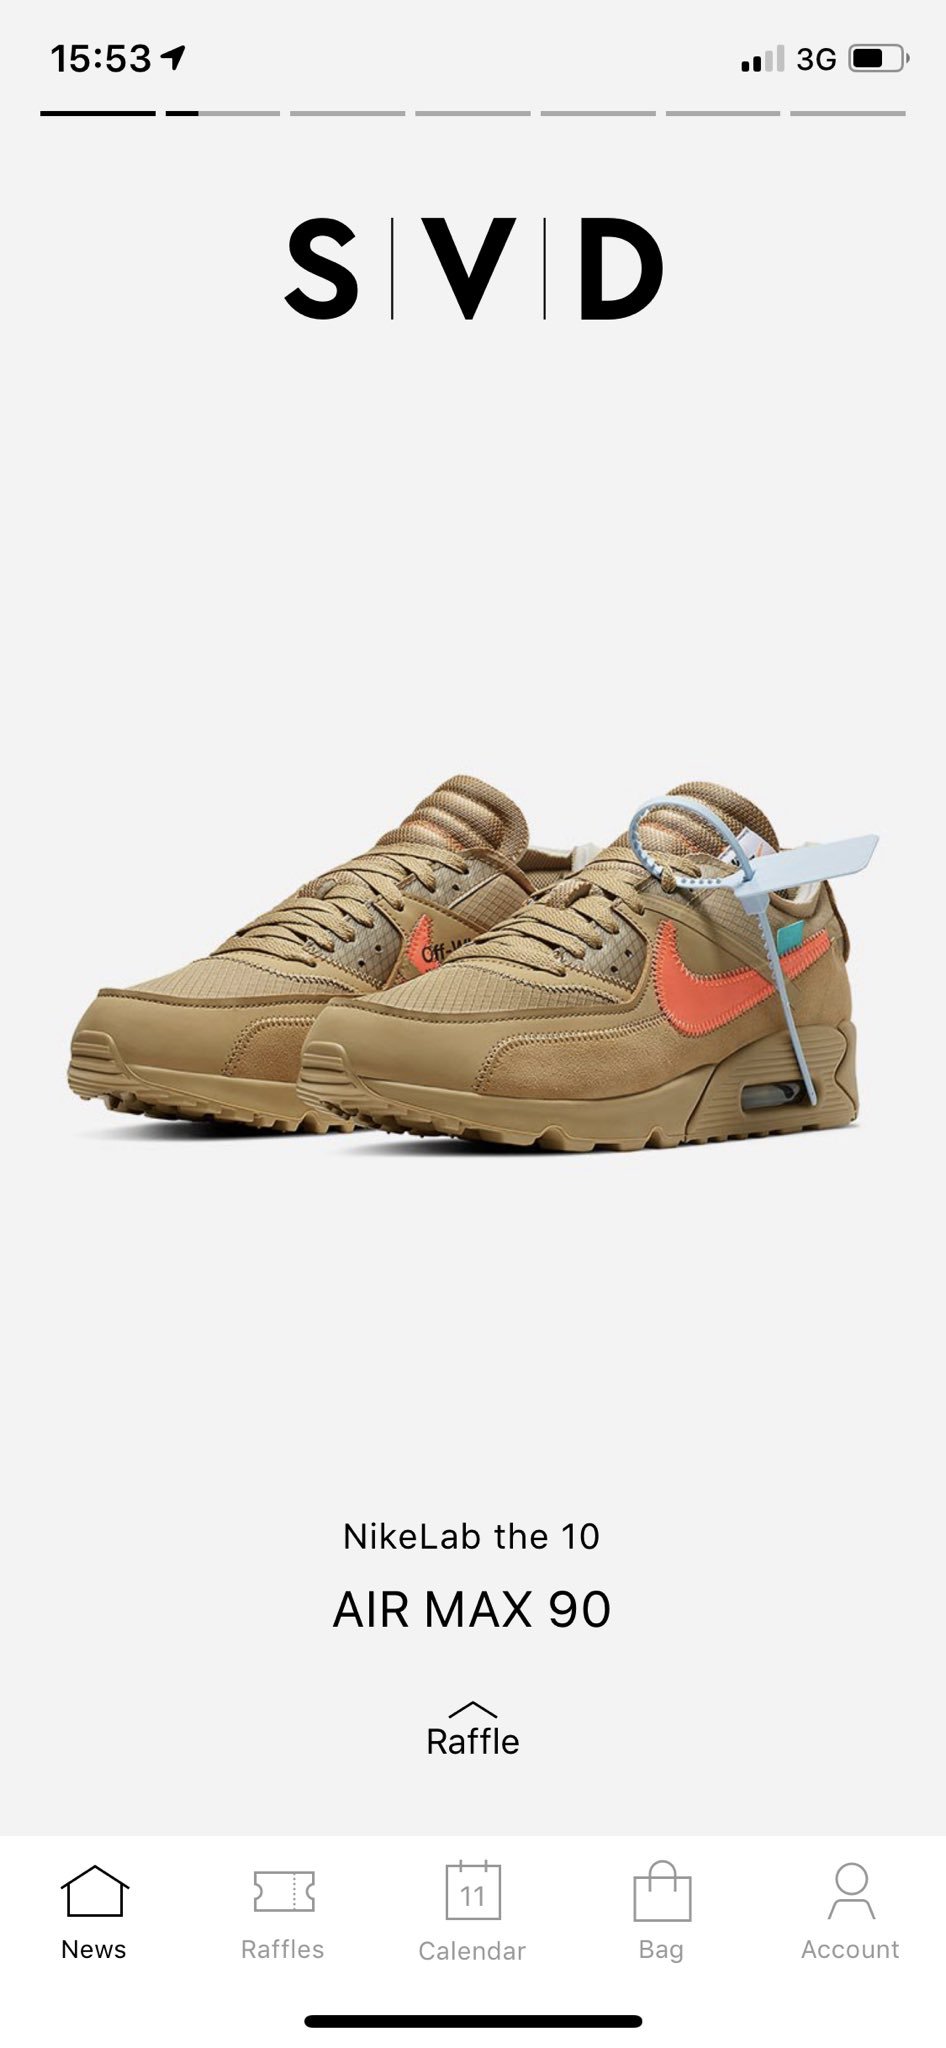 Sole Retriever on Twitter: "Woof! The SVD app is now live! Raffle for Off-White x Nike Air Max 90's are love in the app! Hopefully this app can stop the